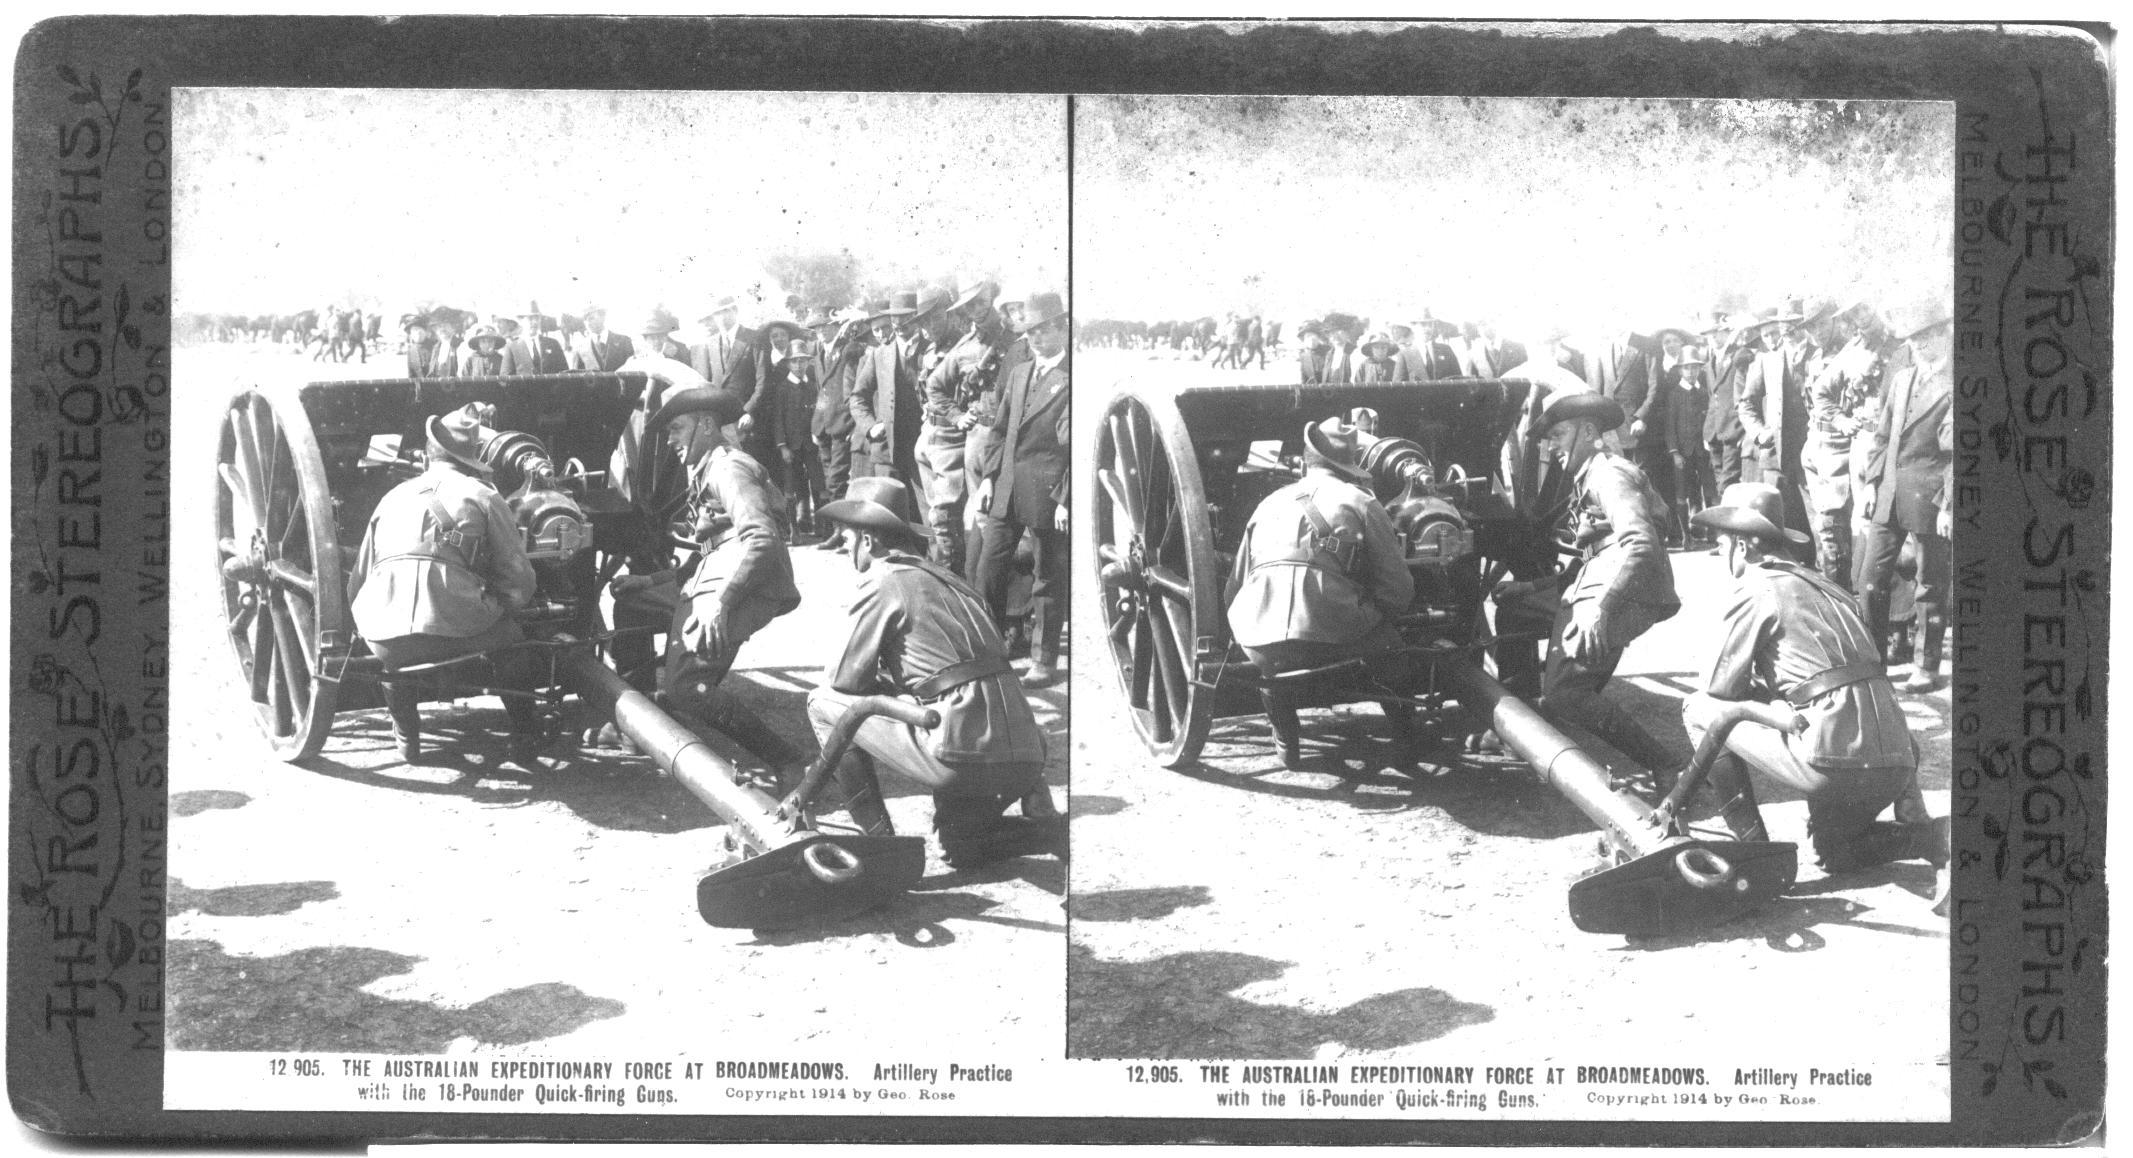 THE AUSTRALIAN EXPEDITIONARY FORCE AT BROADMEADOWS. Artillery Practice with the 16-Pounder Quick-firing Guns.